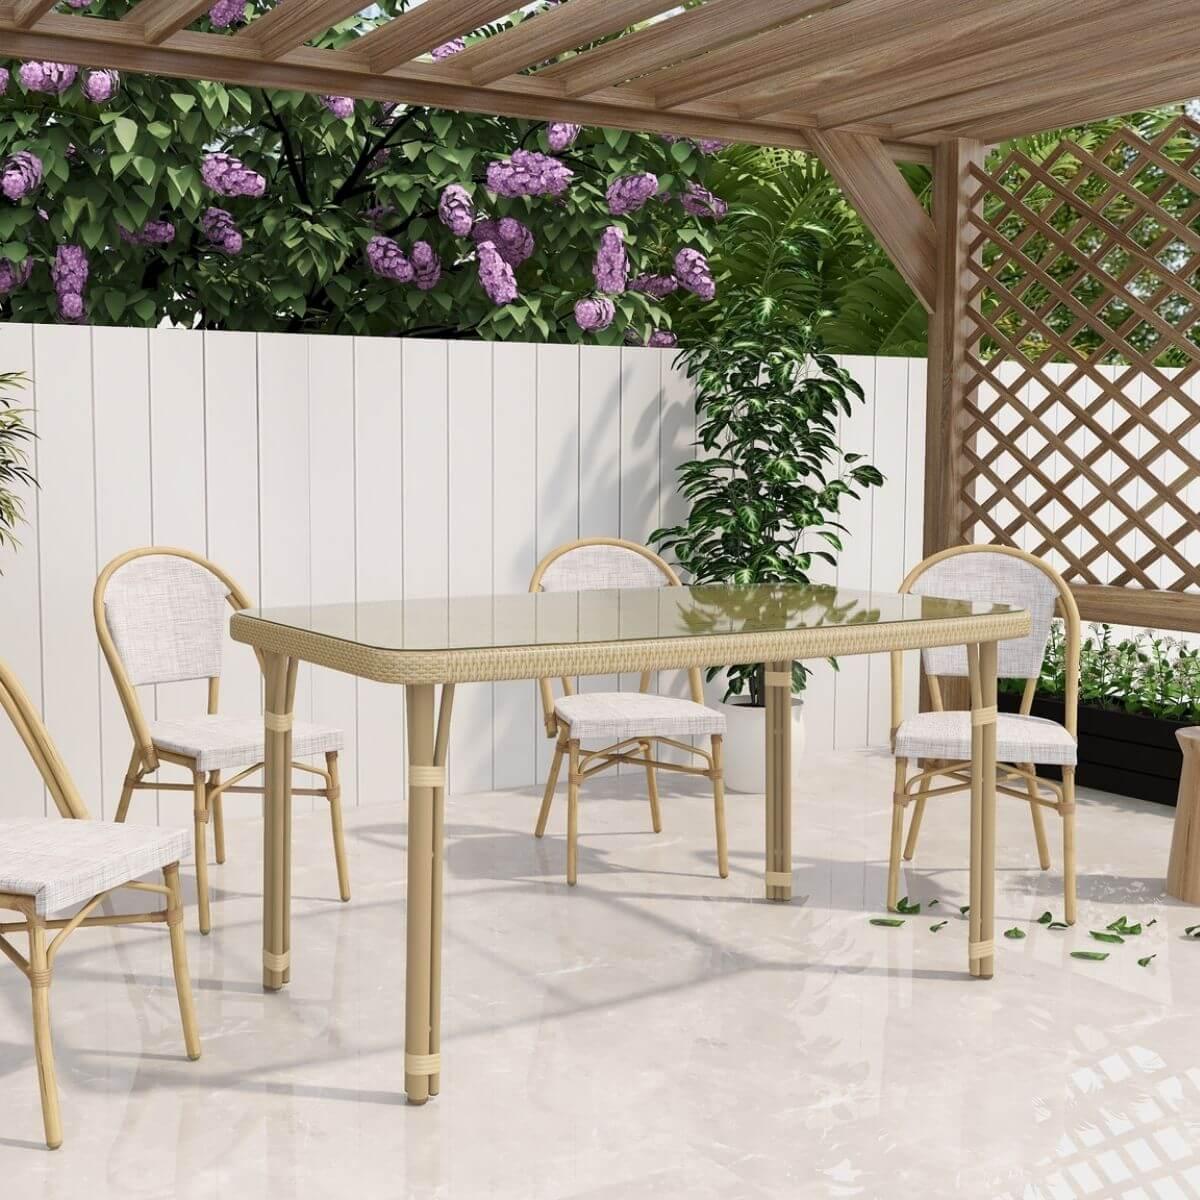 Curly Mediterranean Natural Outdoor Dining Table